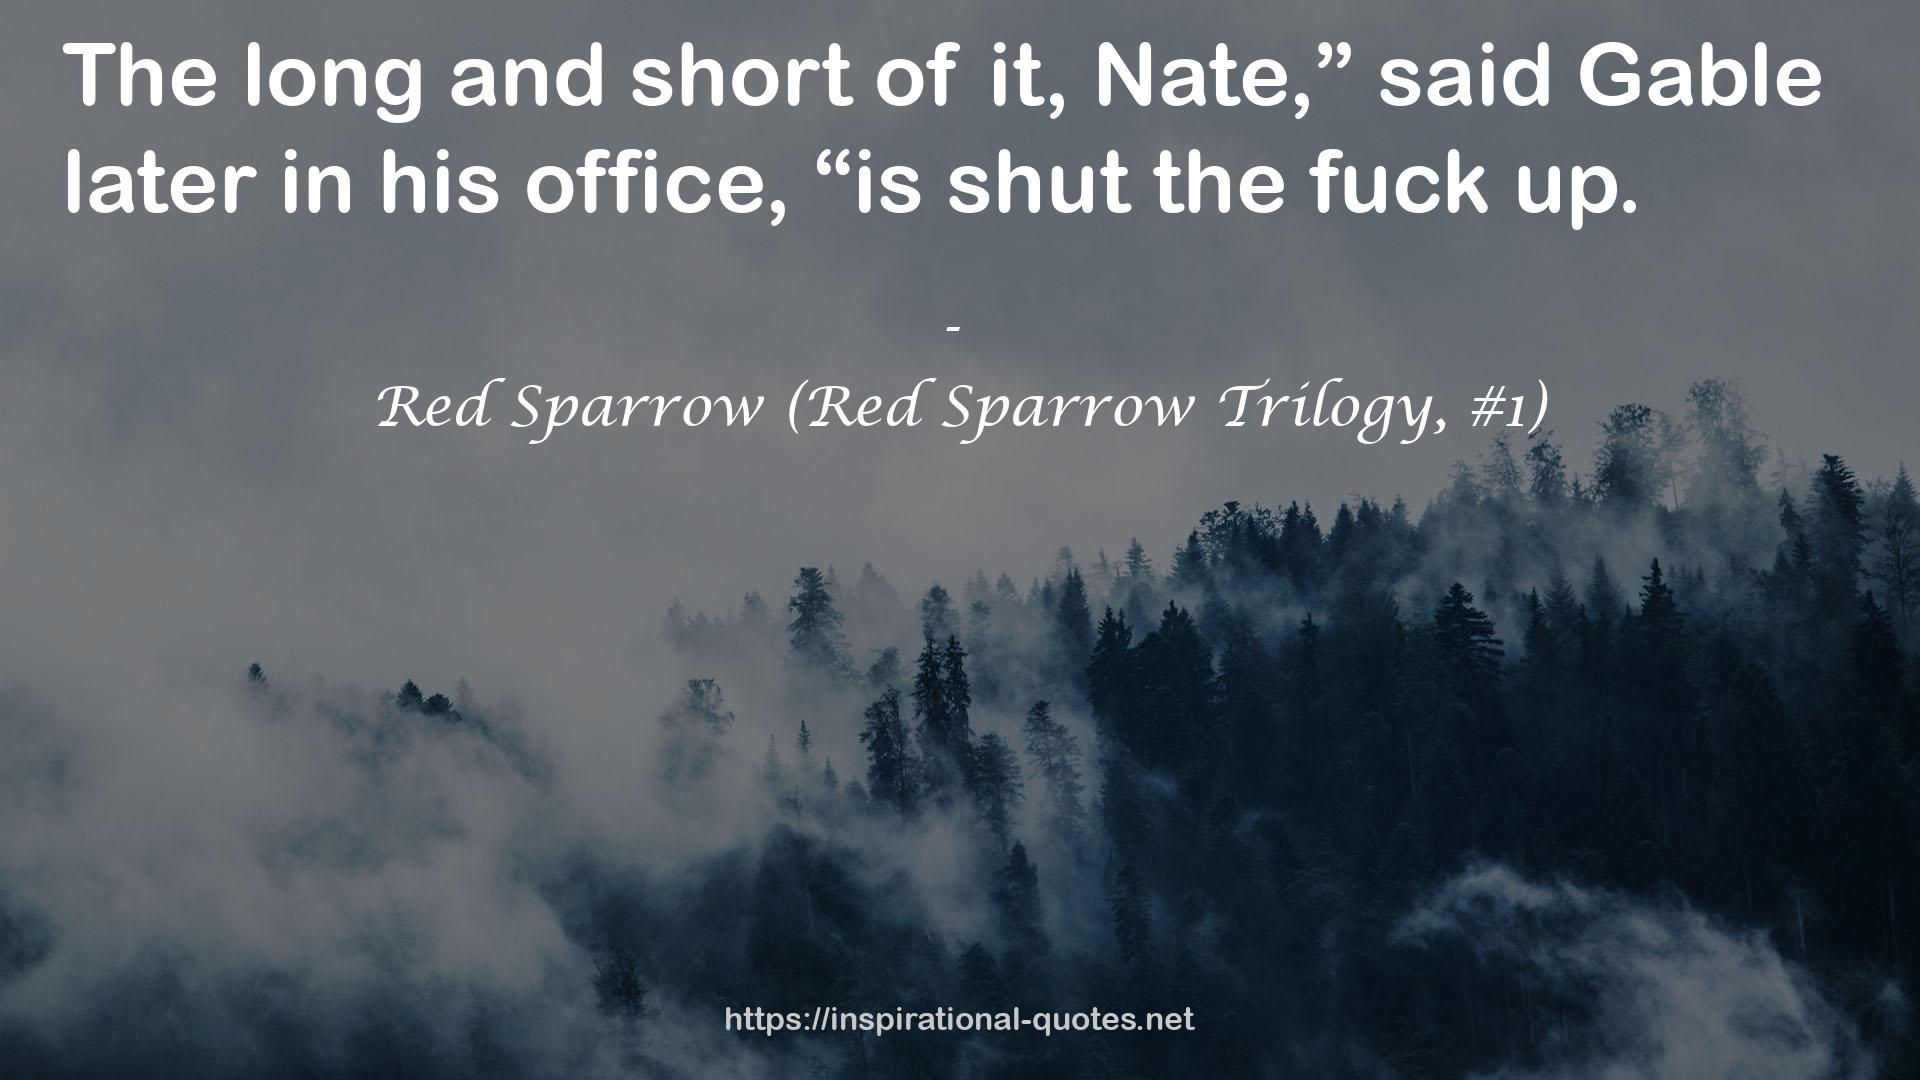 Red Sparrow (Red Sparrow Trilogy, #1) QUOTES